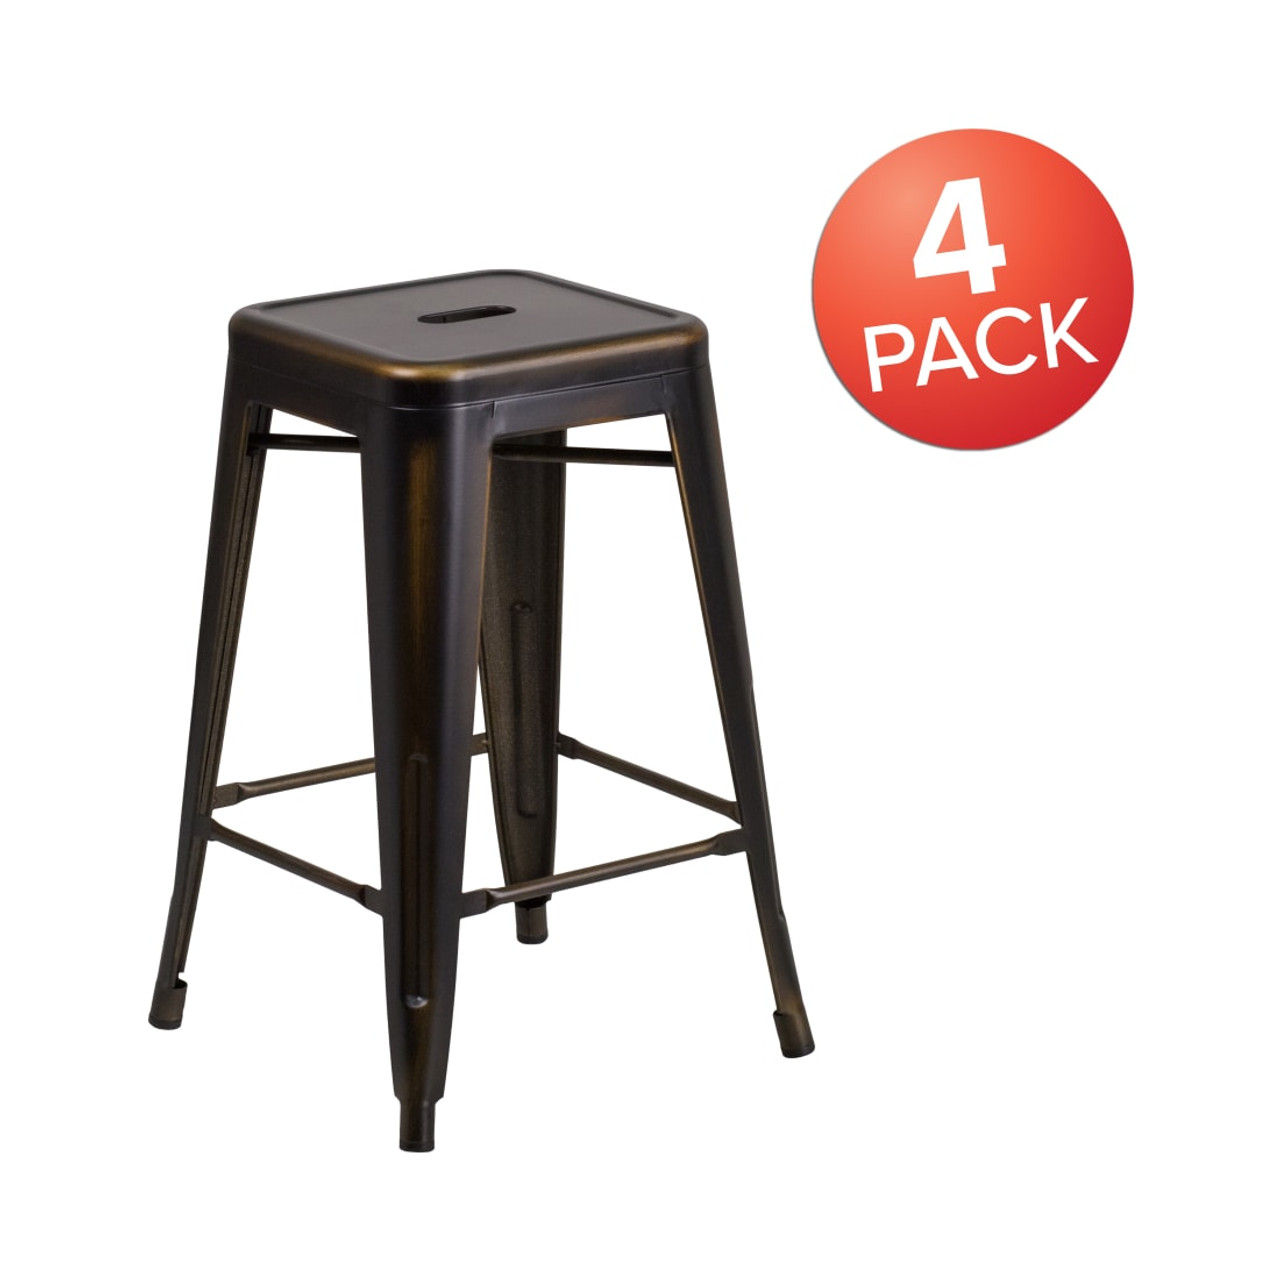 4 Pack 24” High Backless Distressed Copper Metal Indoor-Outdoor Counter Height Stool